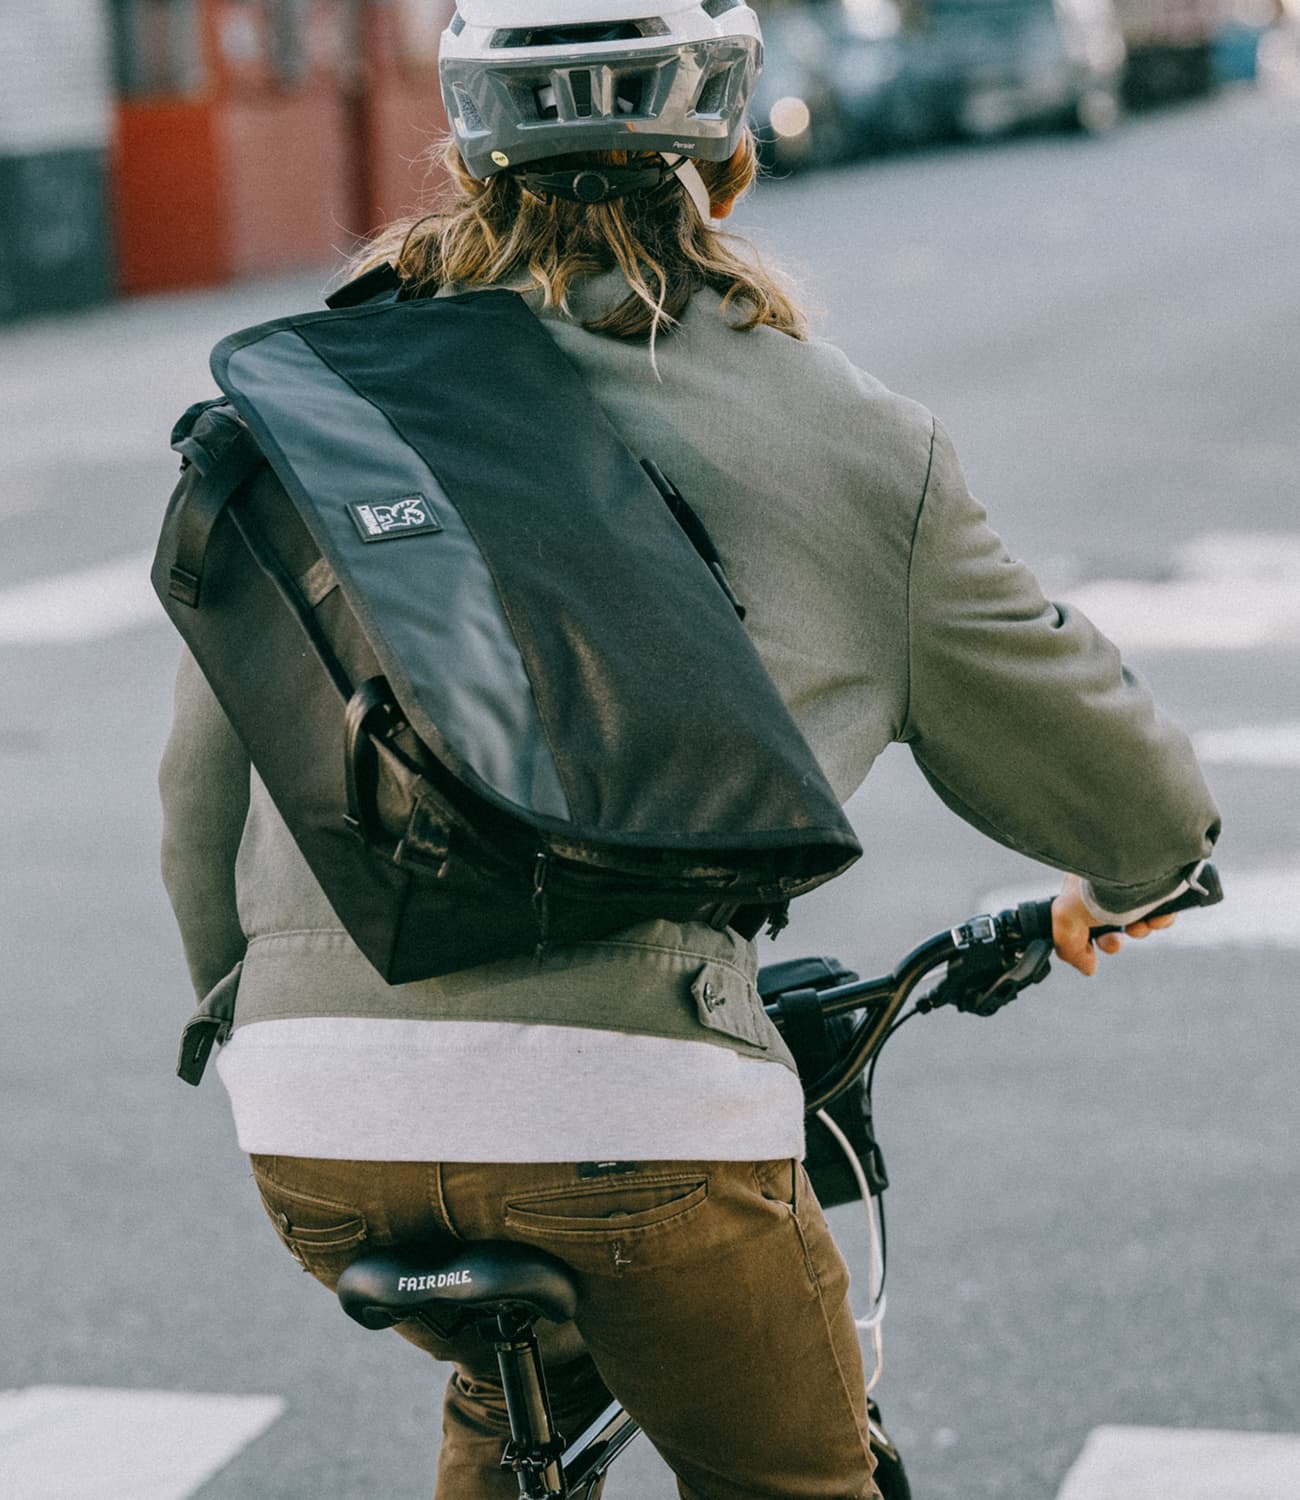 Buran III Messenger bag in black worn by a person riding a bike